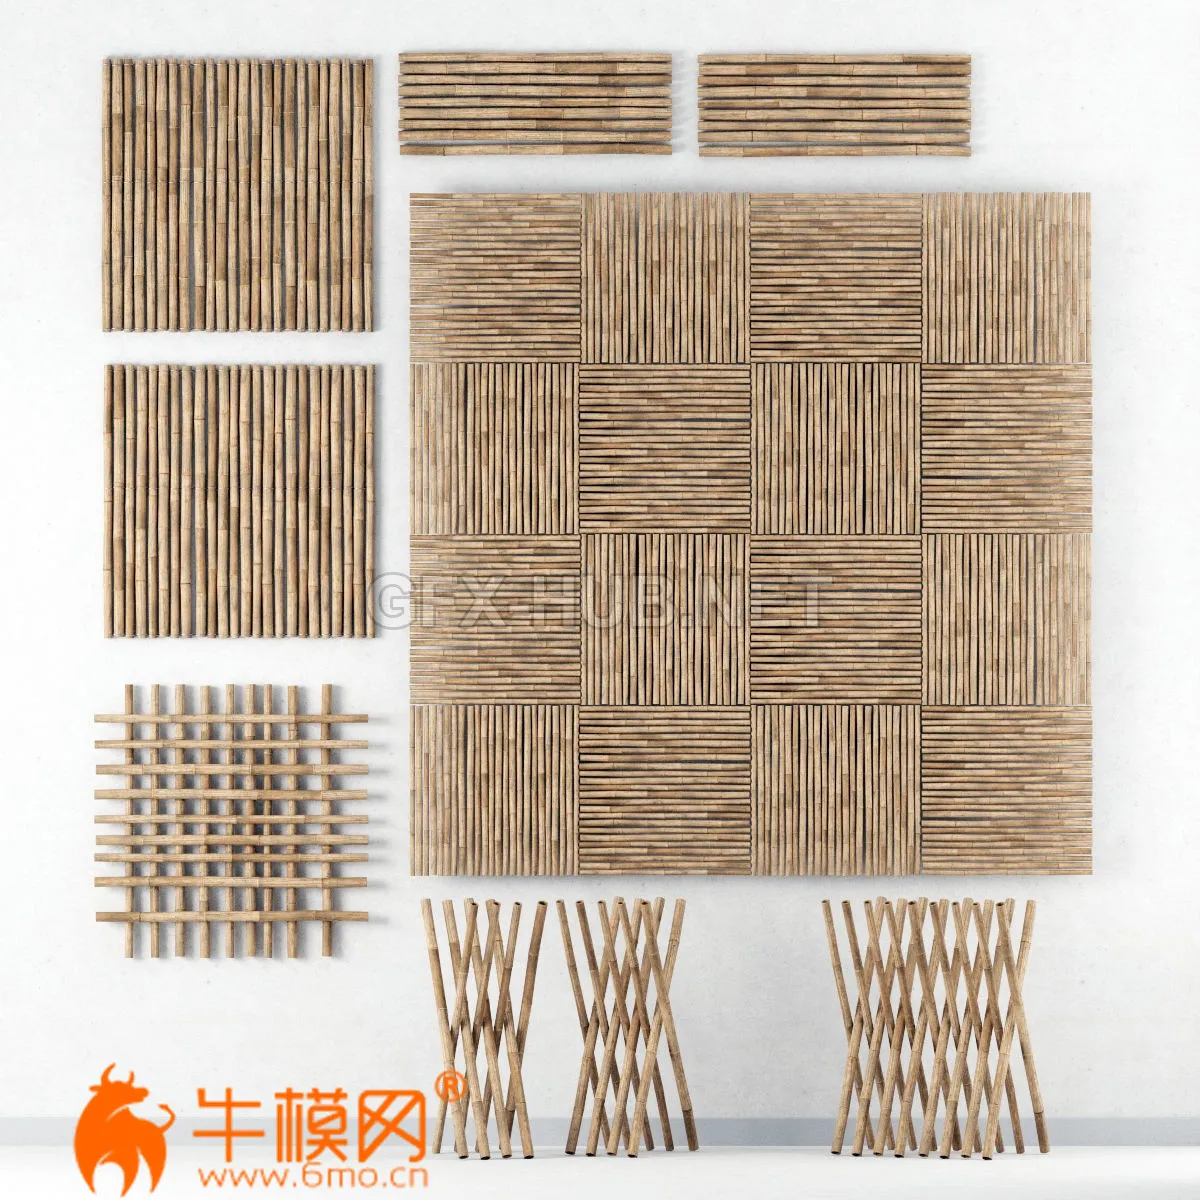 Decor of bamboo collection (max 2011 Vray) 3d model – 4610